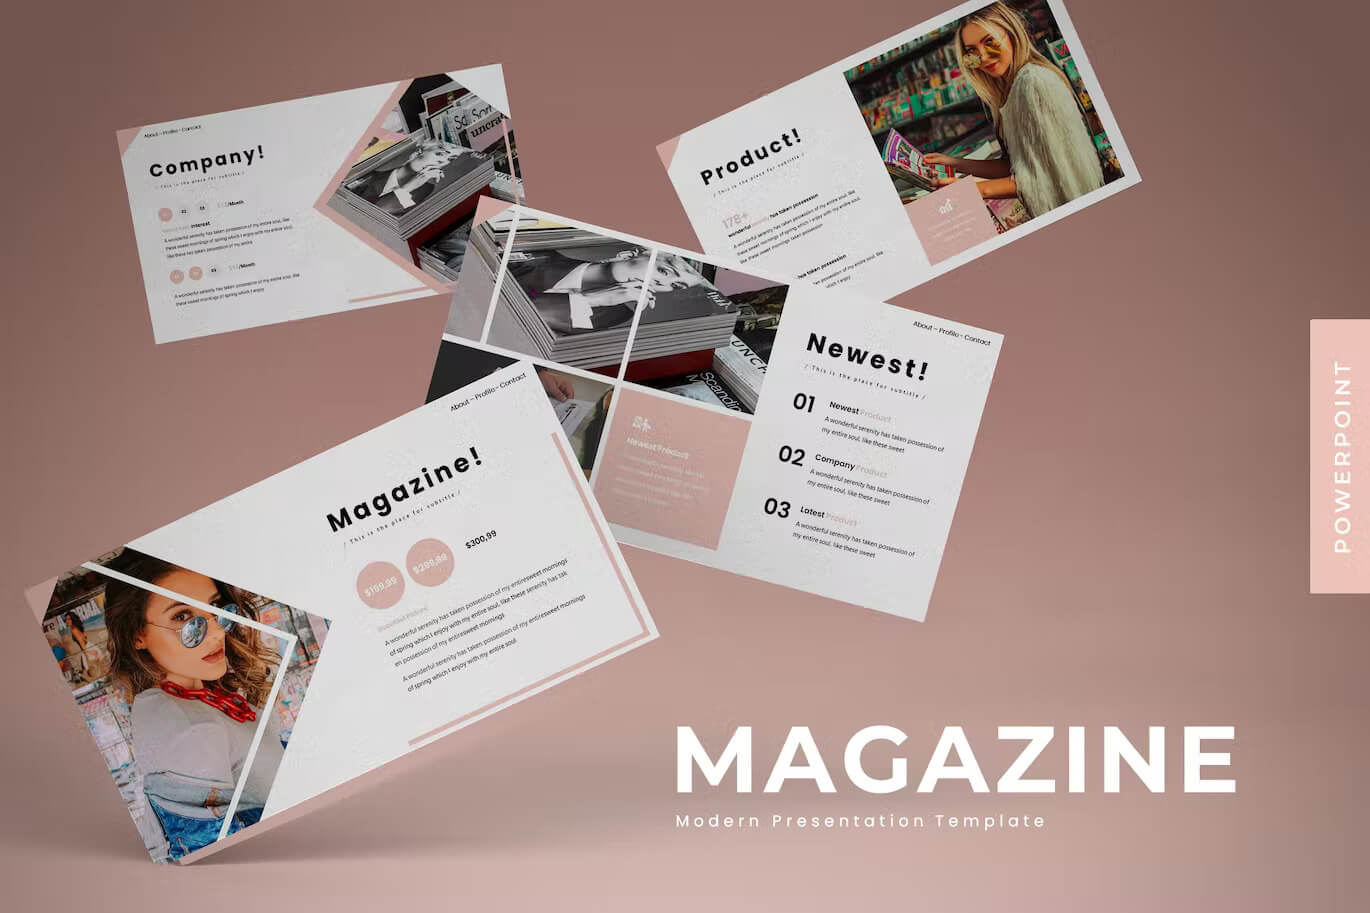 Powerpoint magazine template with flyers in the center and header at the bottom.